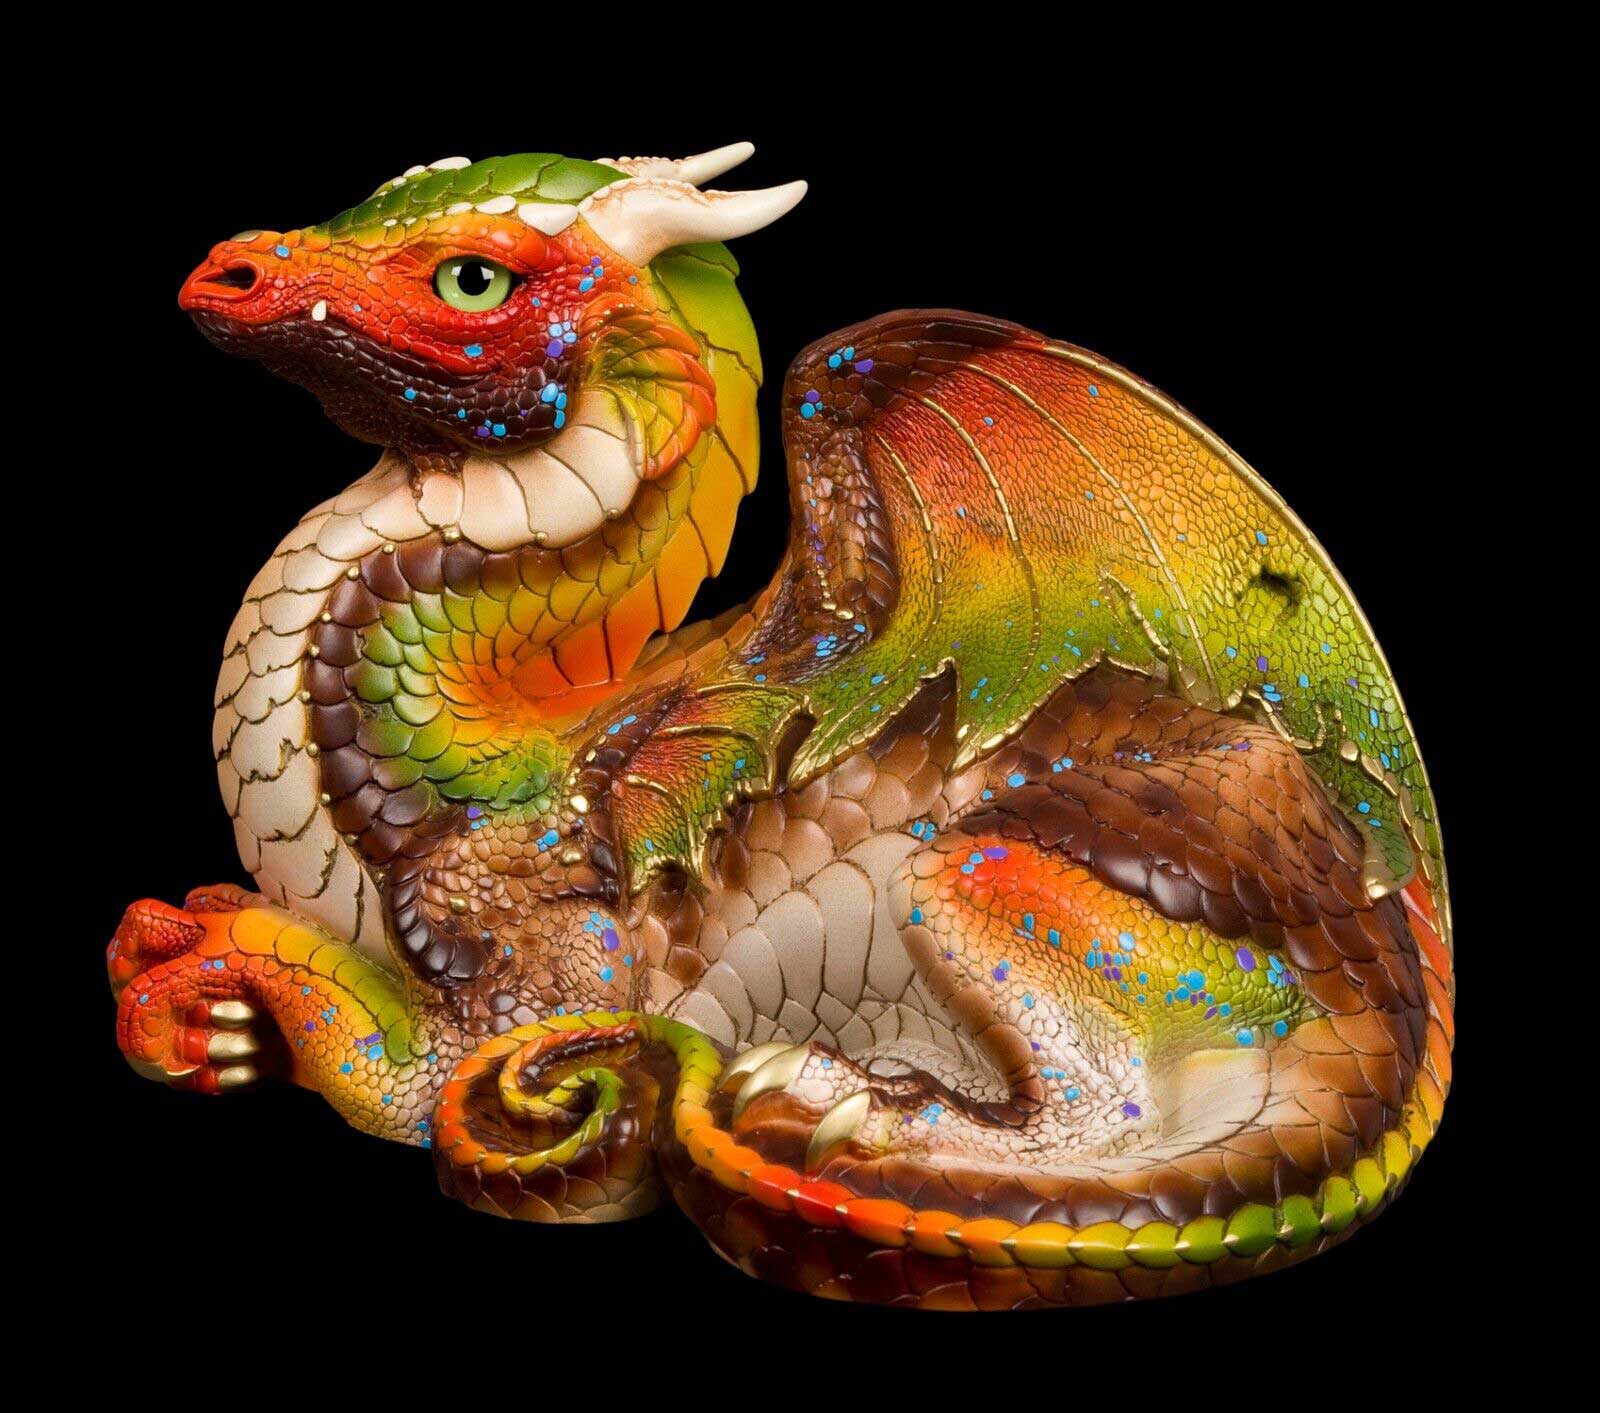 20230126-Autumn-Harvest-Old-Warrior-Dragon-Test-Paint-1-by-Gina